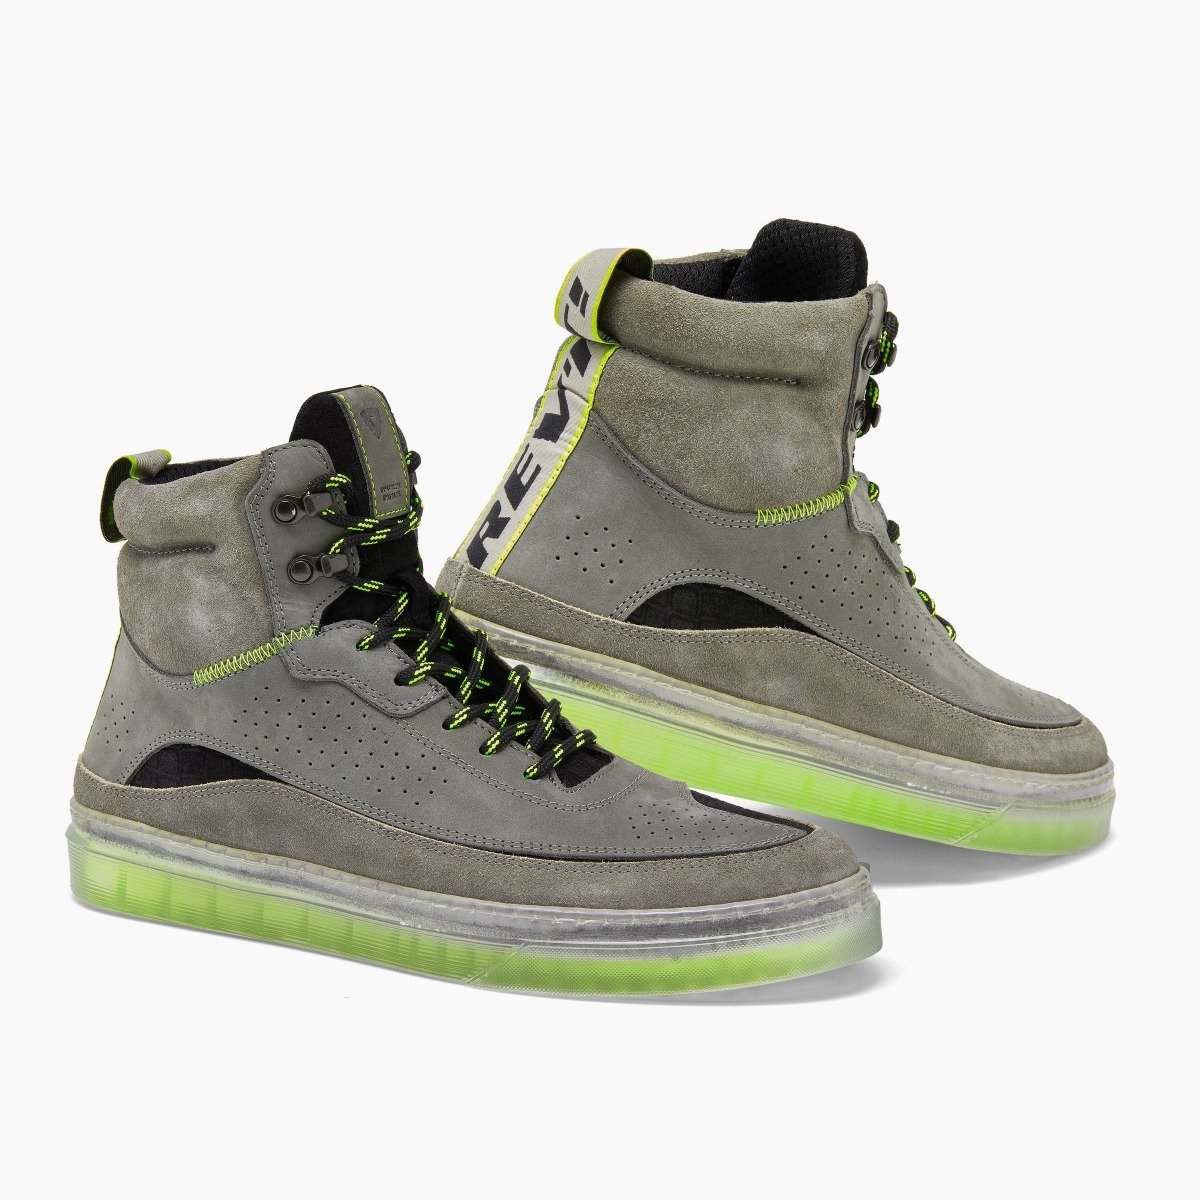 Image of REV'IT! Filter Gray Neon Yellow Motorcycle Shoes Size 45 ID 8700001307413